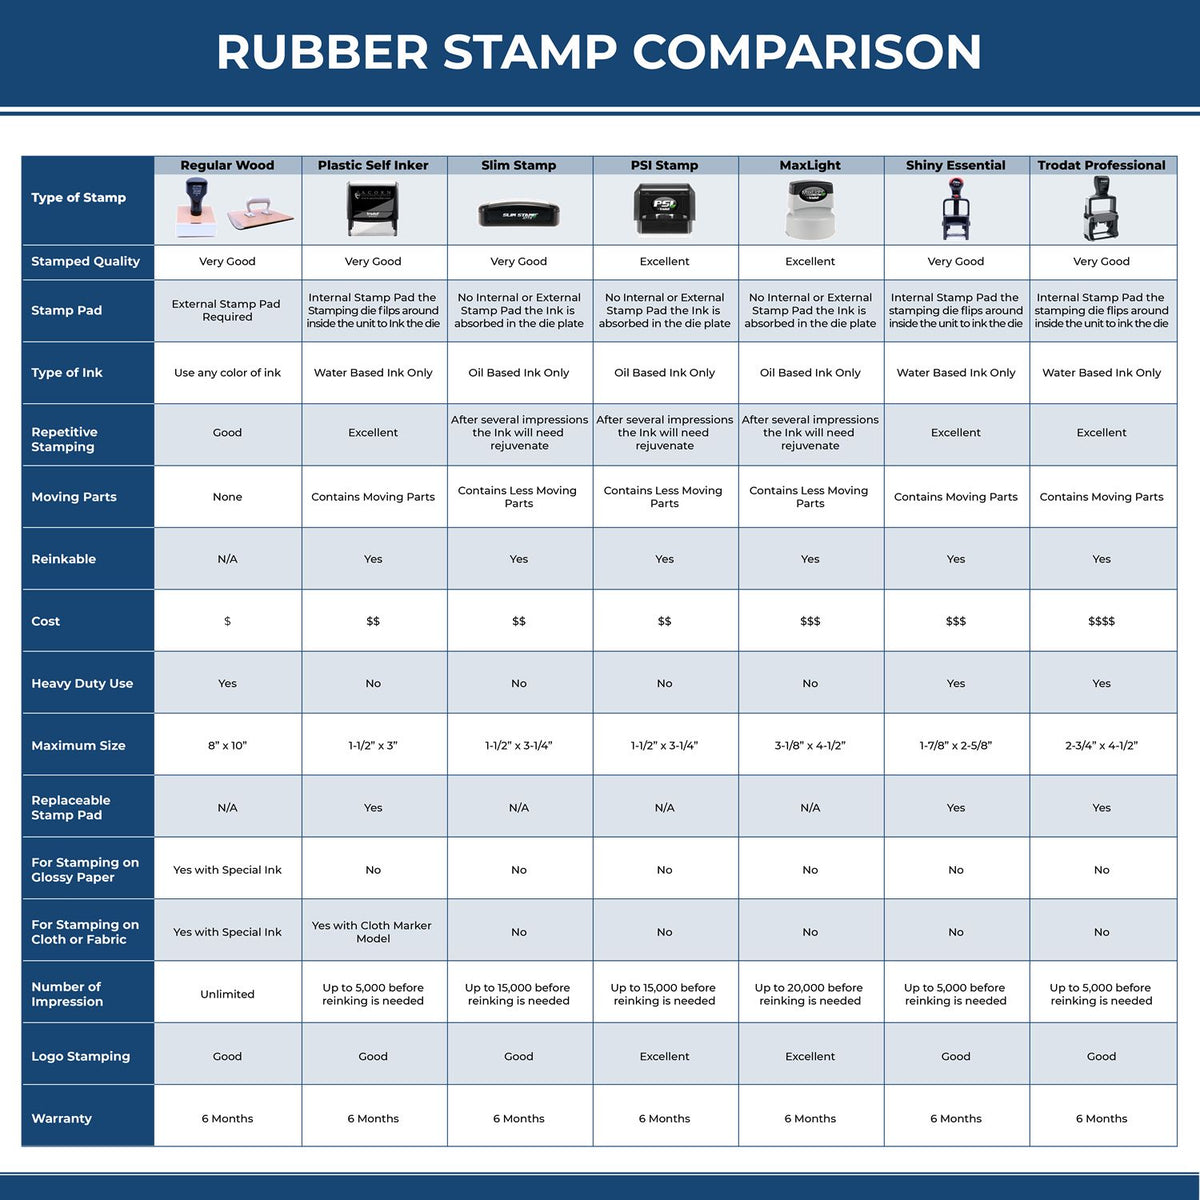 A comparison chart for the different types of mount models available for the PSI Idaho Notary Stamp.